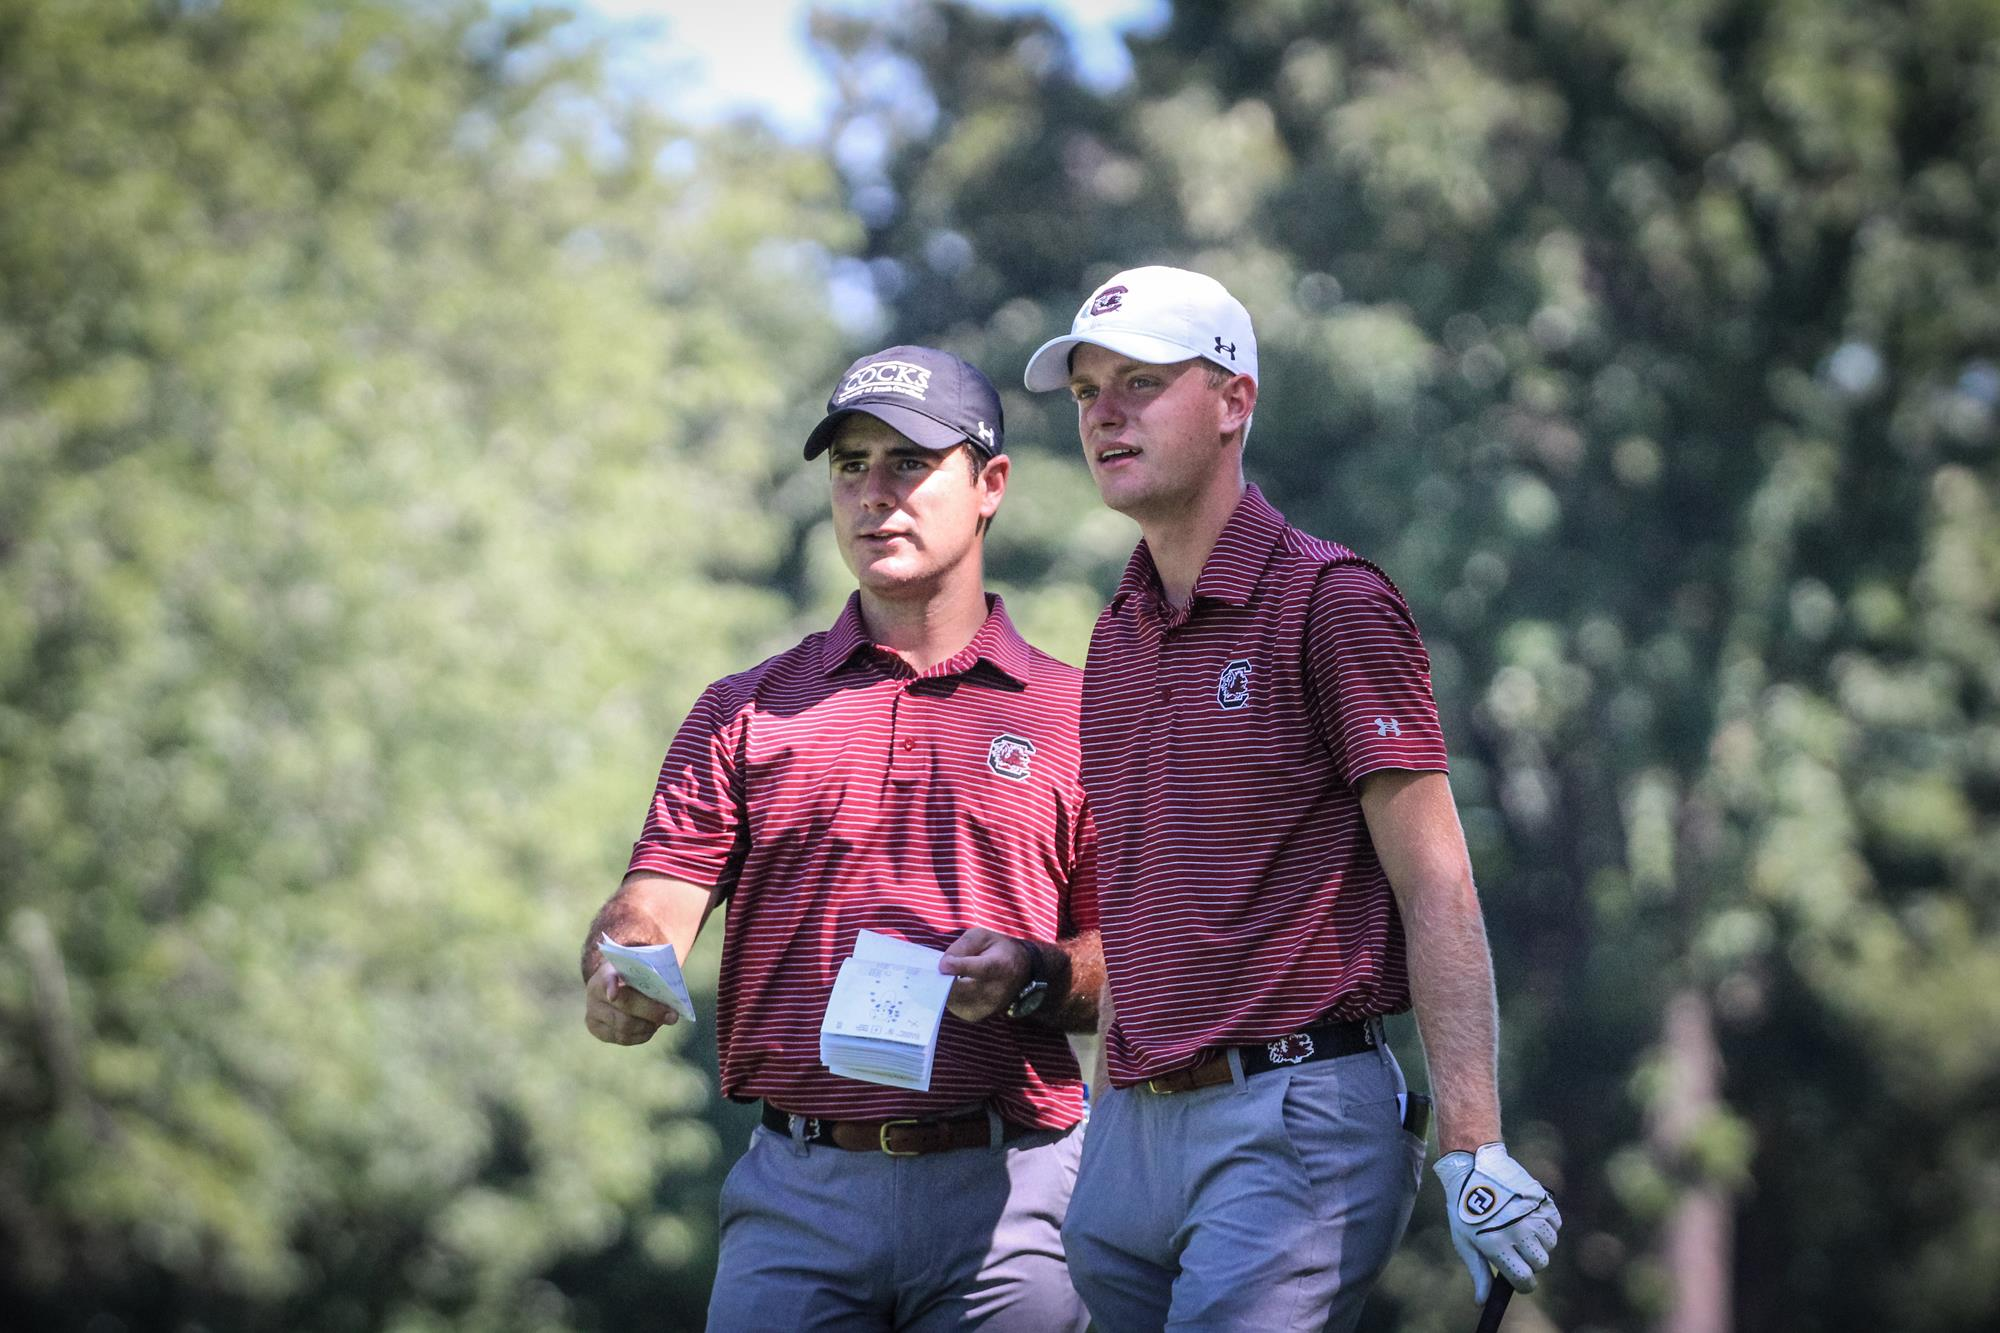 Gamecocks T-3rd after first round of OFCC/Fighting Illini Inv.